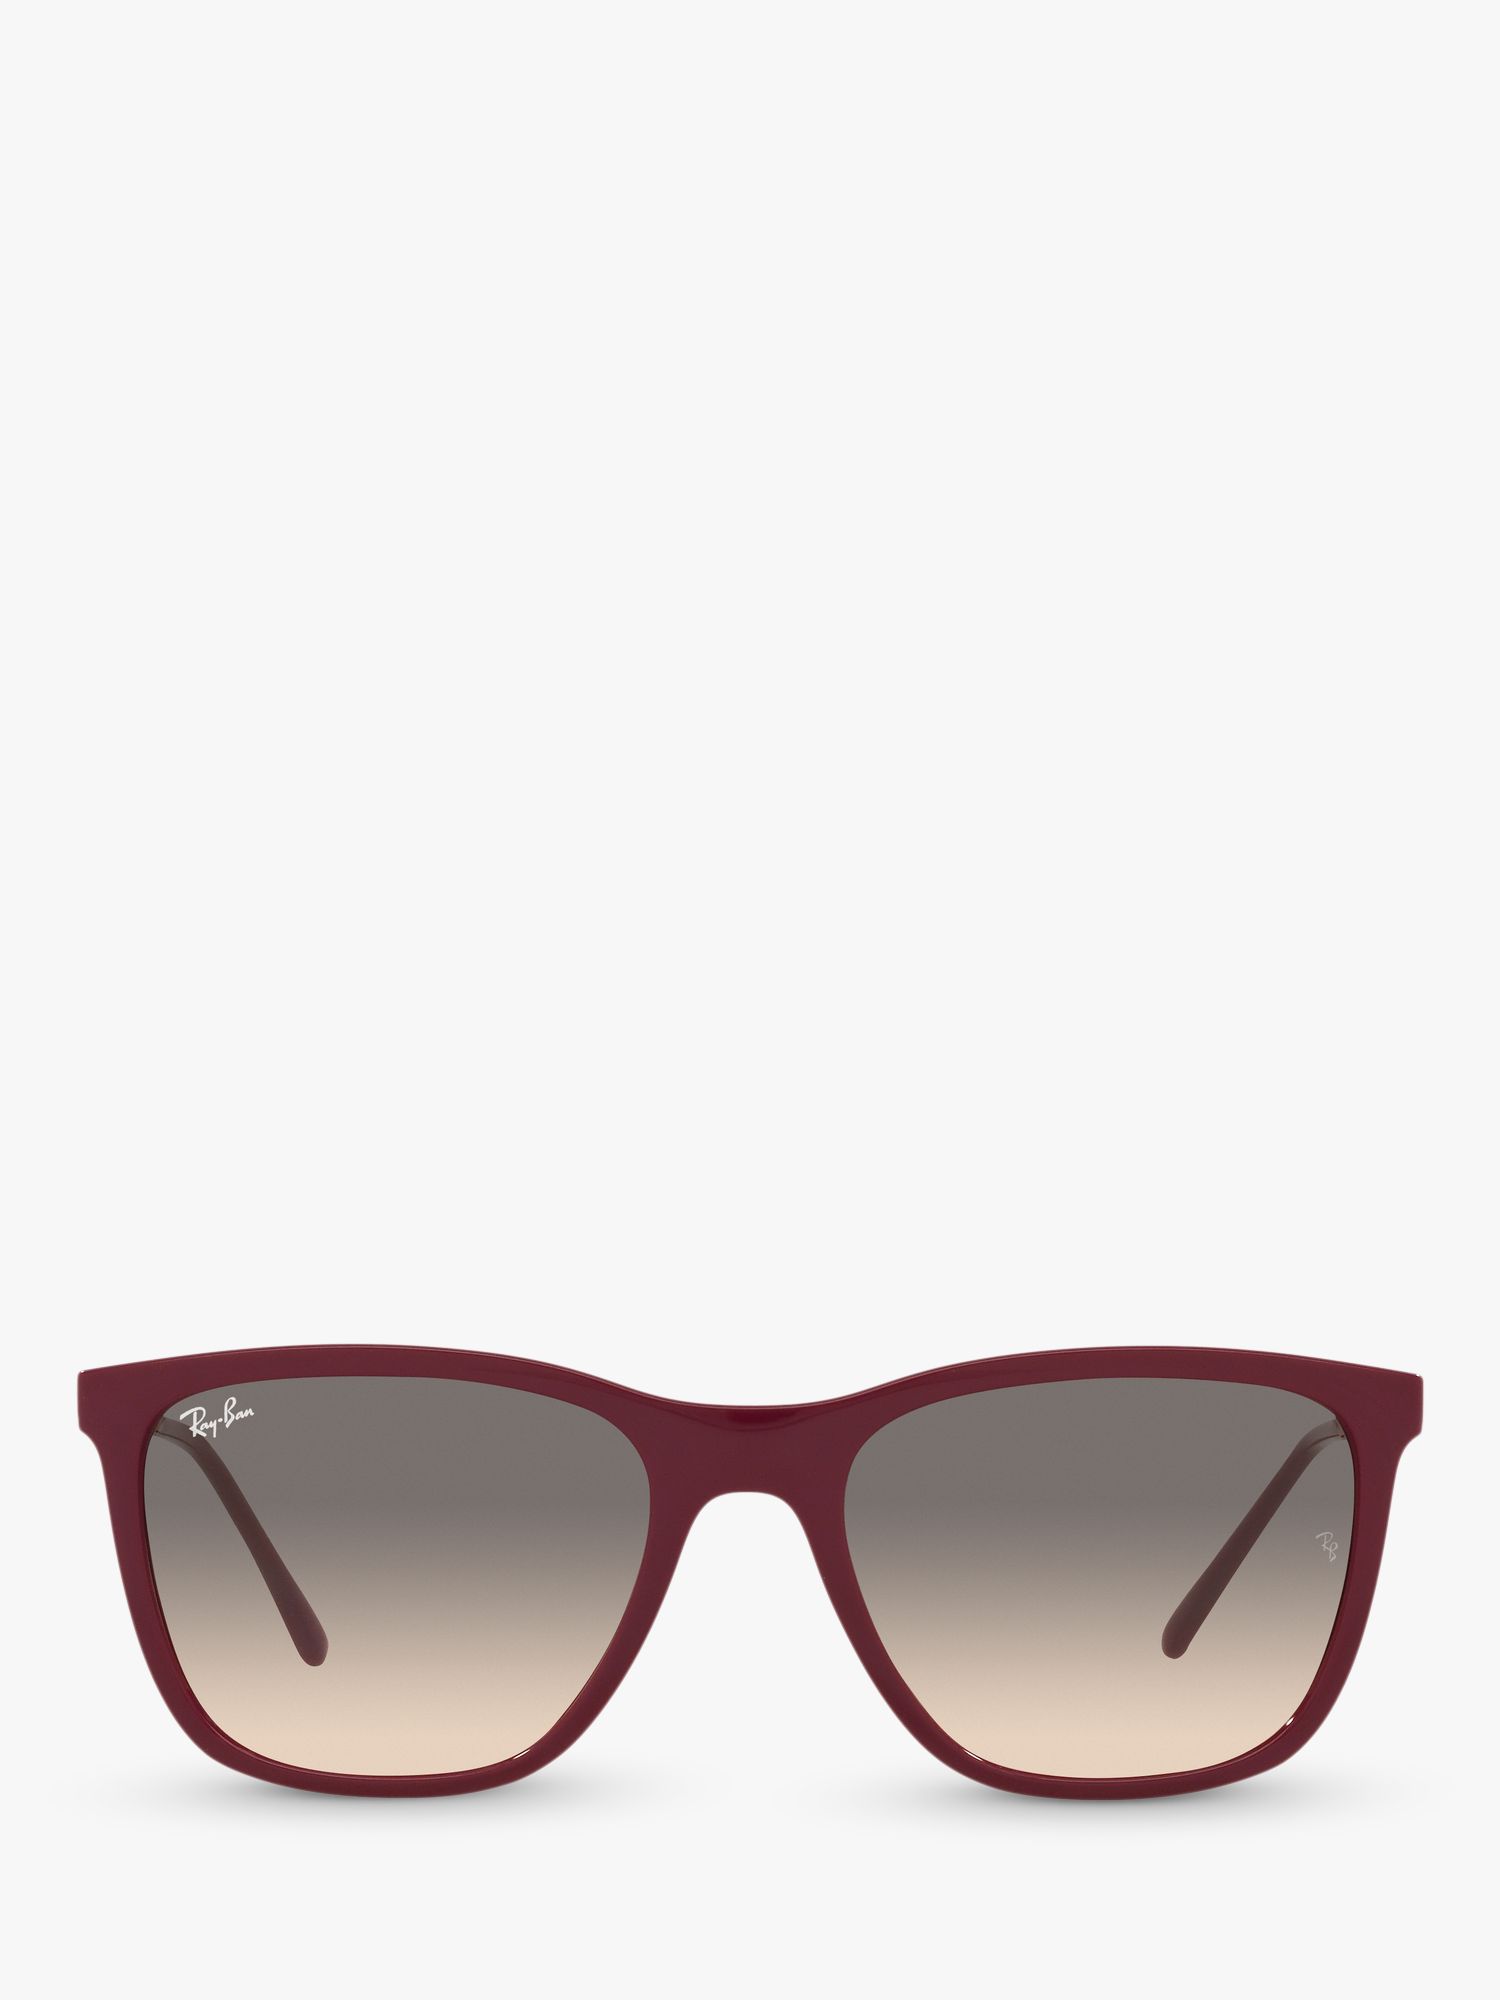 Ray-Ban RB4344 Unisex Pillow Square Frame Sunglasses, Cherry Red/Gold/Light  Grey Gradient at John Lewis & Partners